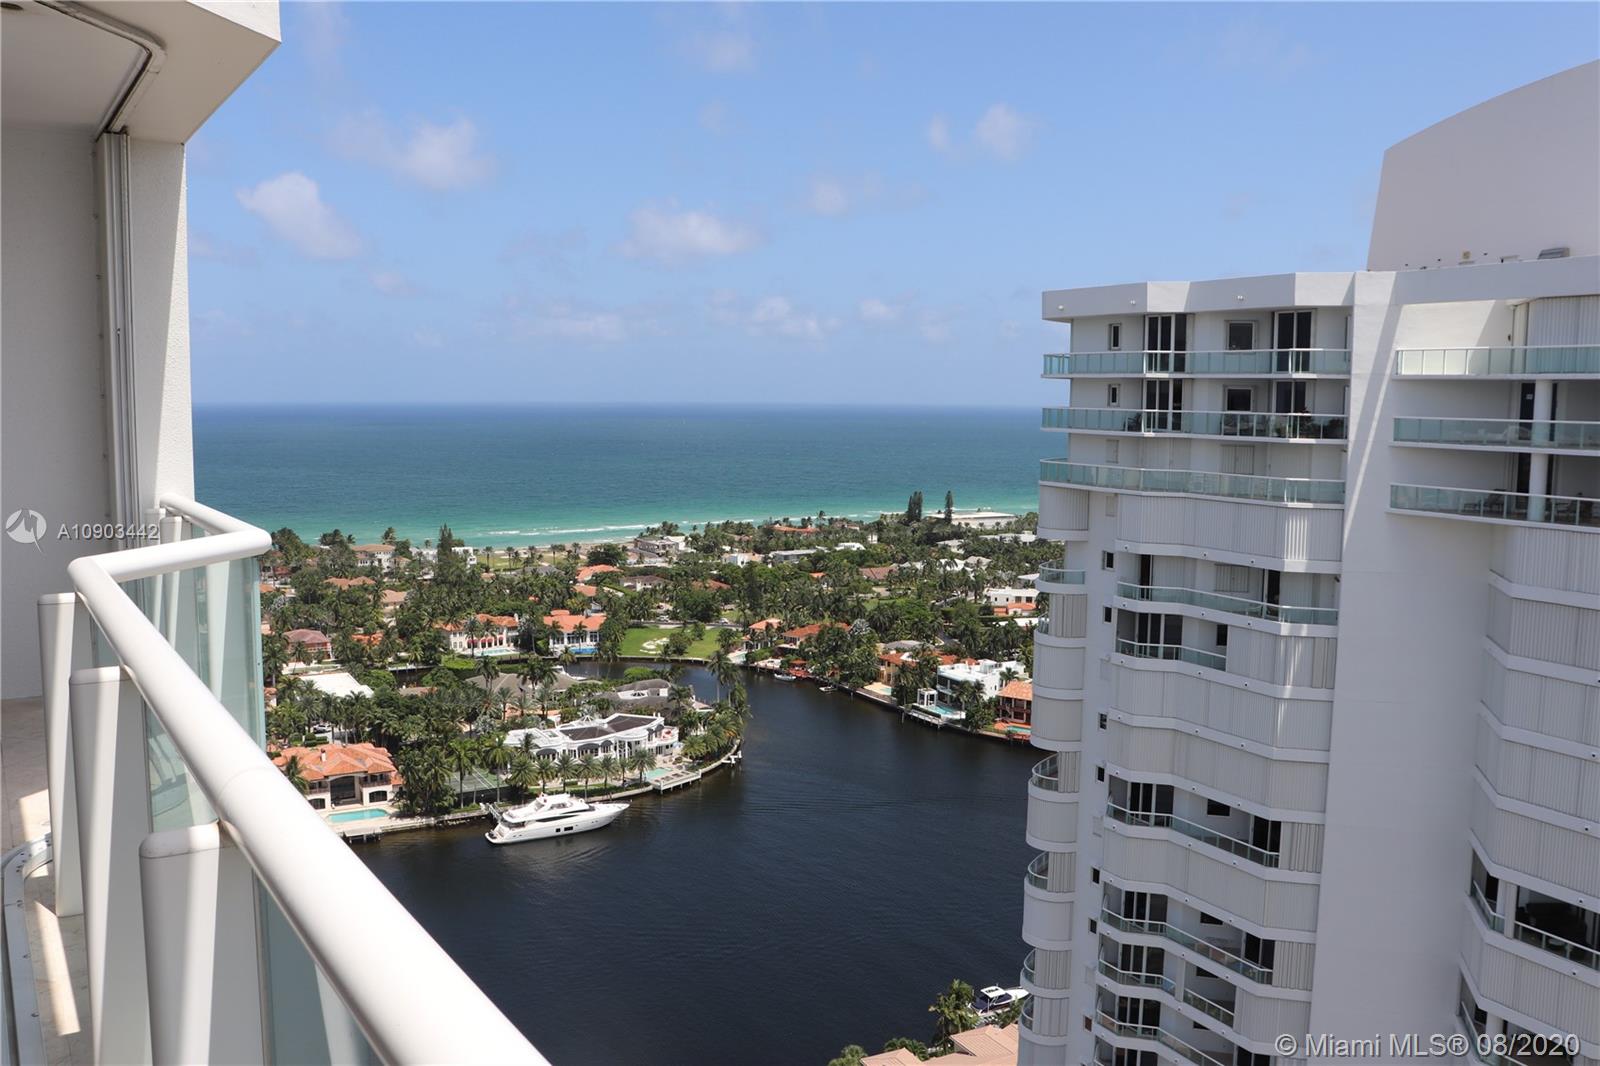 Photo 1 of Atlantic II At The Point Apt 3002 in Aventura - MLS A10903442